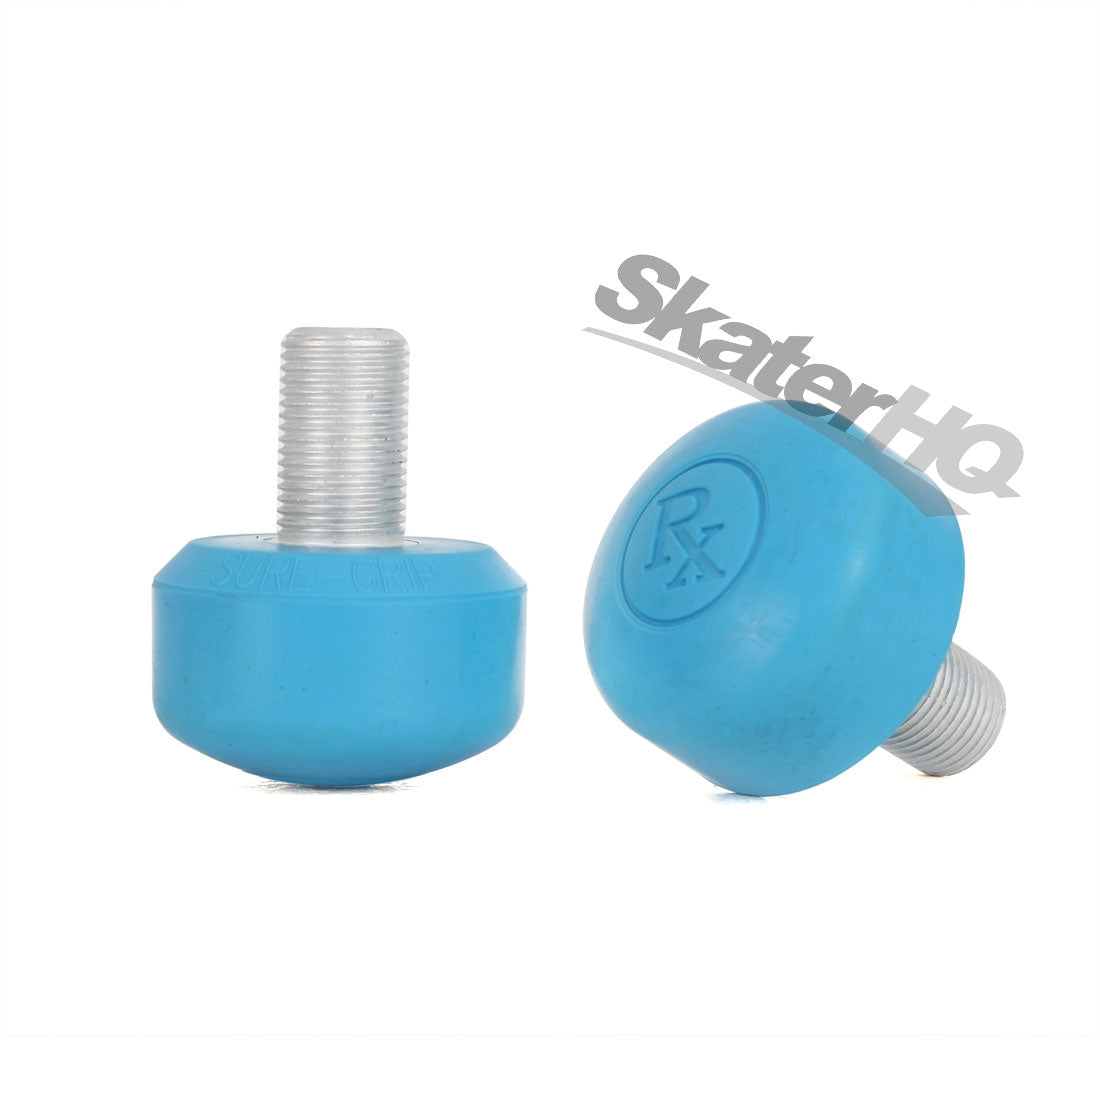 Sure-Grip RX Toe Stop Pair - Blue Roller Skate Hardware and Parts